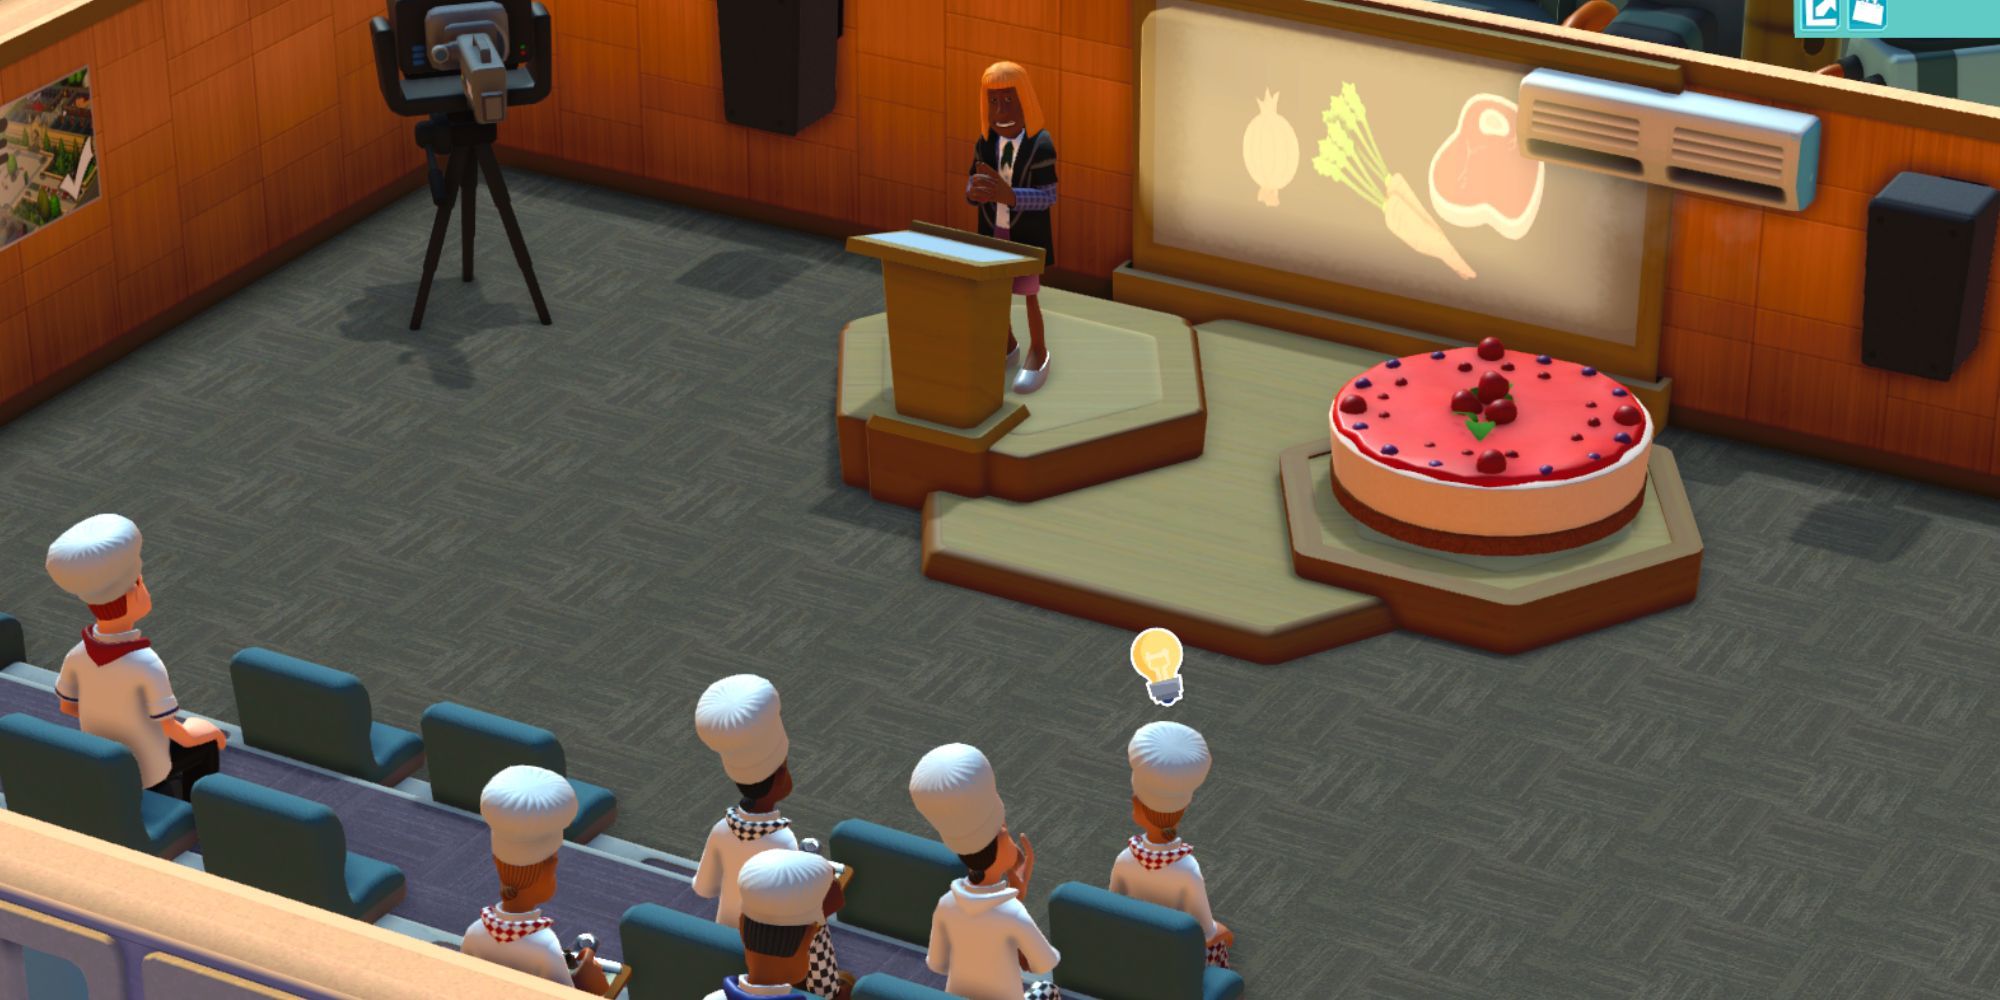 Two Point Campus students attending a lecture for Gastronomy, featuring a floating pink cake.